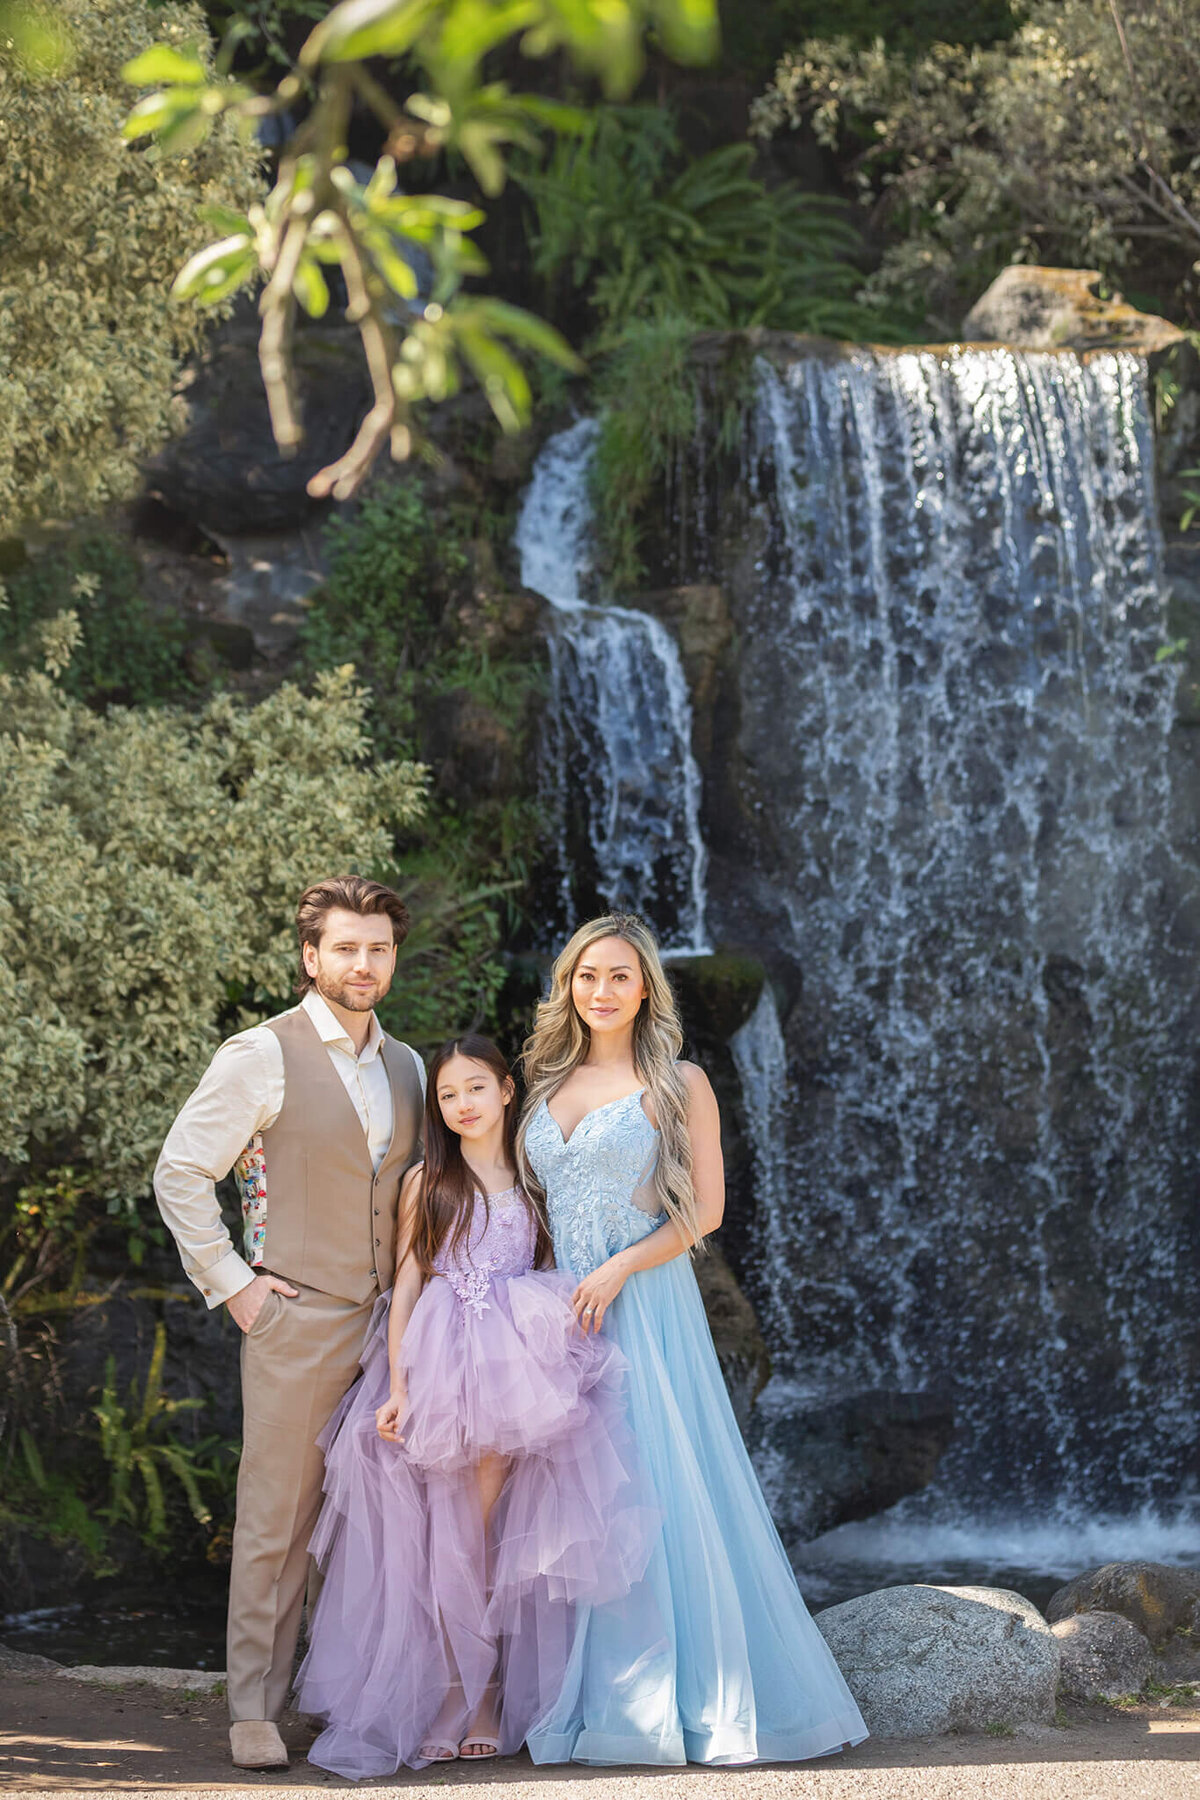 Mom and daughter in beautiful long gowns and dad in a beige suit photographed in front of a waterfall at Los Angeles Arboretum - Los Angeles Family Photography